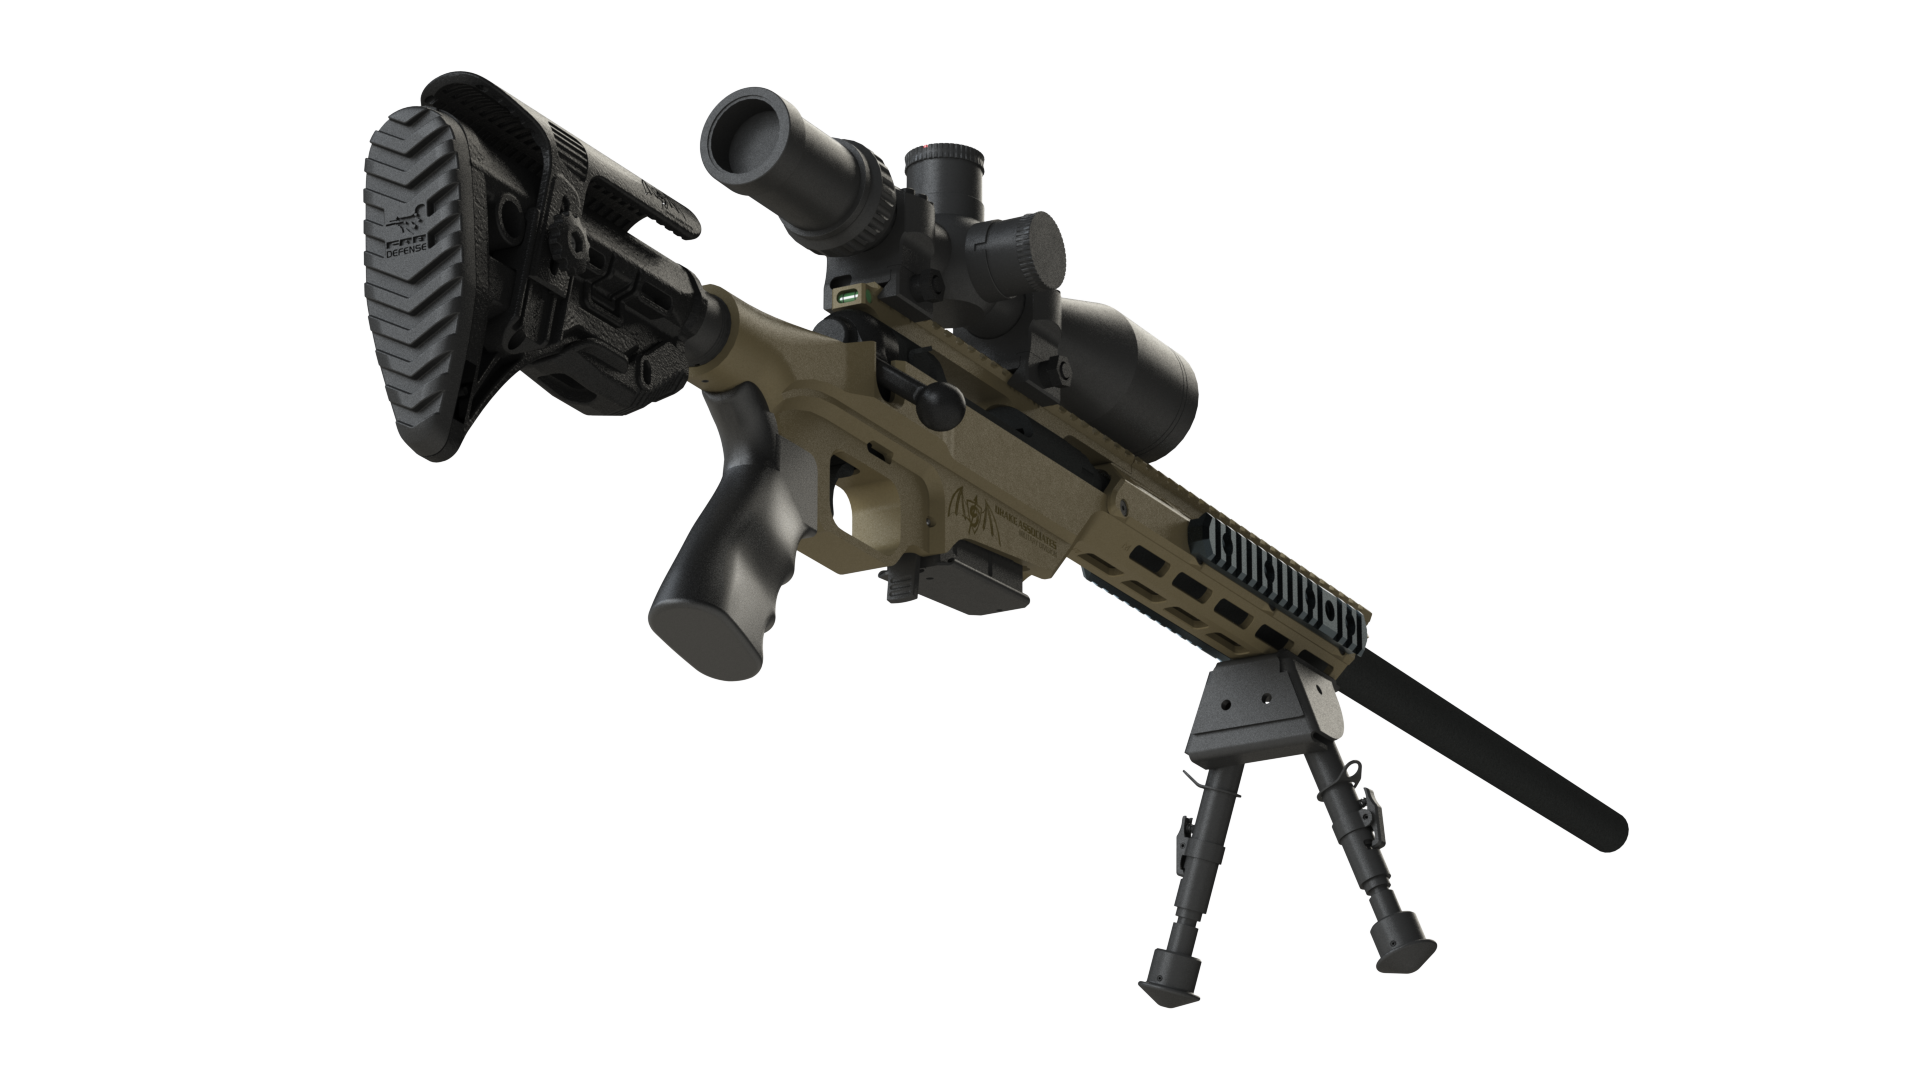 soldiers clipart sniper